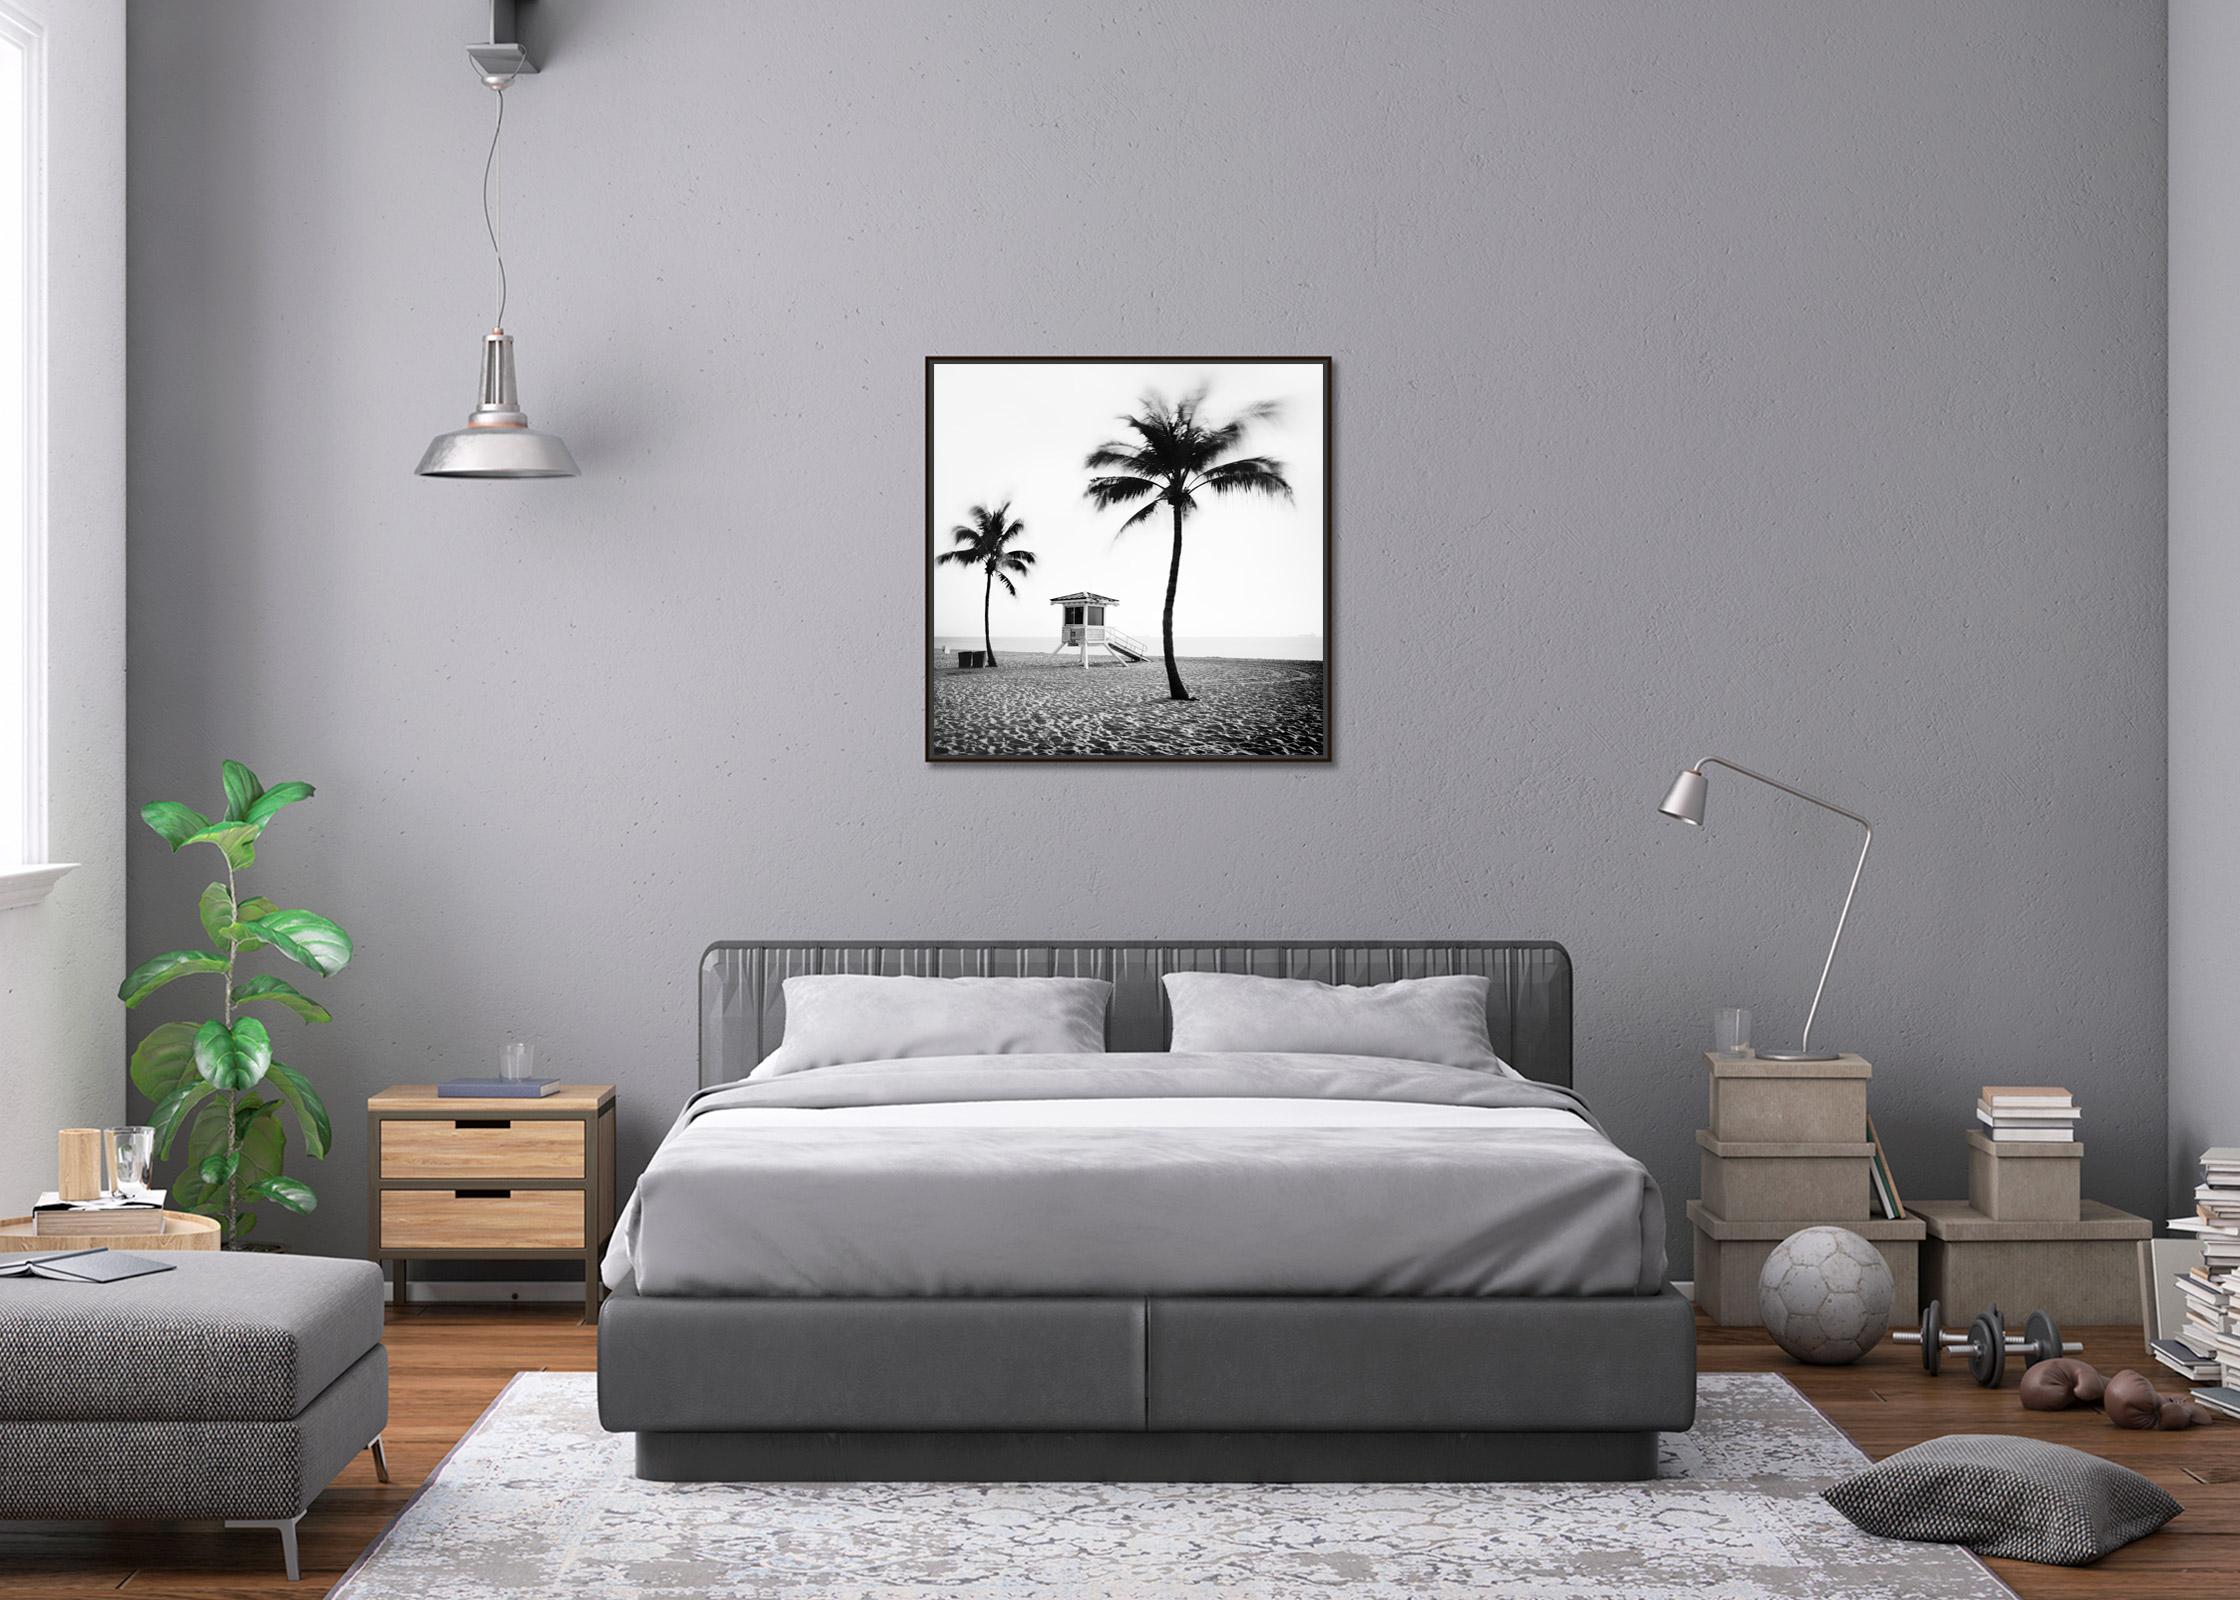 Black and White Fine Art landscape photography - Fort Lauderdale Beach with lifeguard tower and palm trees, Florida, USA. Archival pigment ink print, edition of 7. Signed, titled, dated and numbered by artist. Certificate of authenticity included.